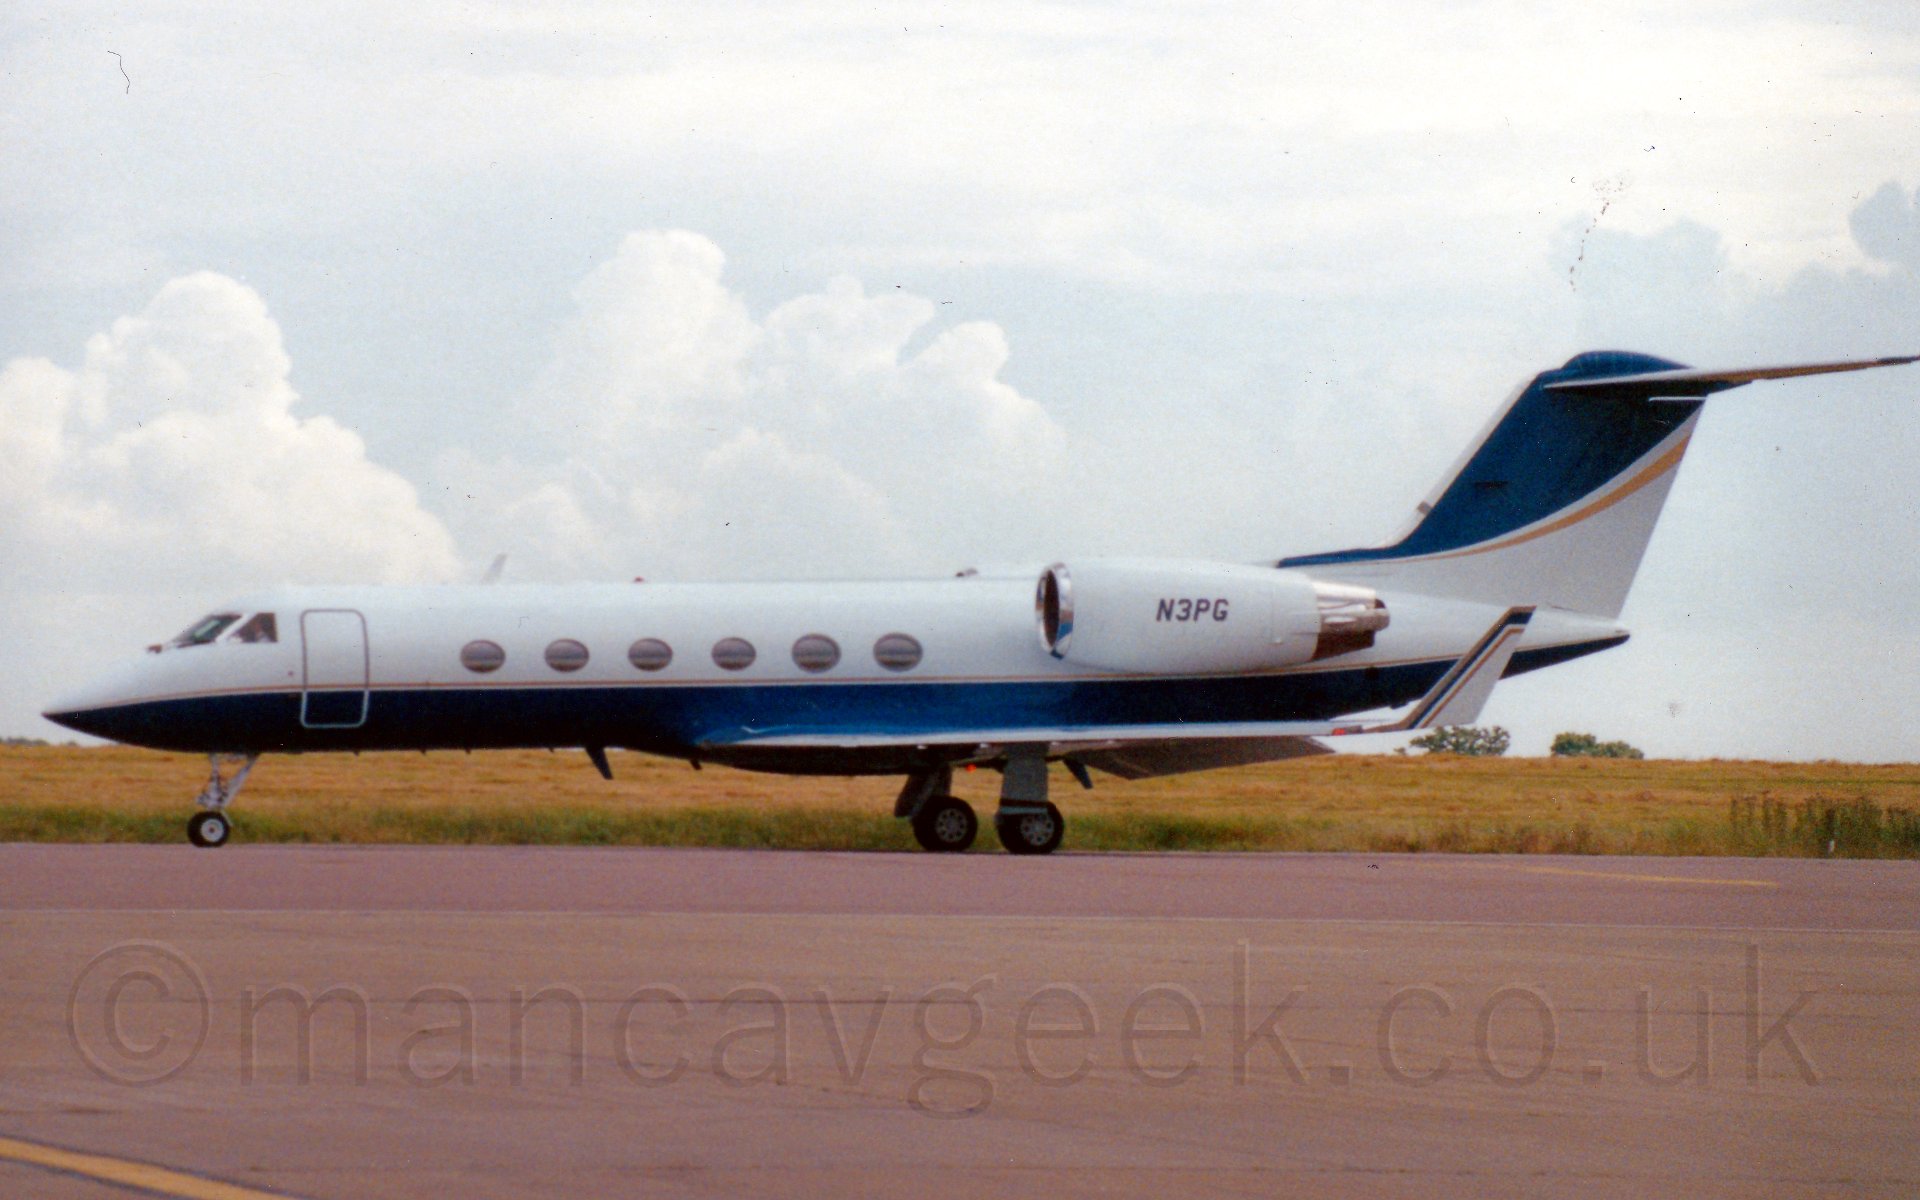 Side view of a twin engined bizjet parked facing to the left. The plane is mostly white, with a blue belly, and a thin golden cheatline. The tail and upturned wingtips have the colours inverted, blue at the front and top, white at the bottom and rear, with a golden line separating them. The registration "N3PG" is on the white engine pods, in black. Tarmac fills the foreground, with grass in the background running off to the horizon, where it meets fluffy grey clouds.